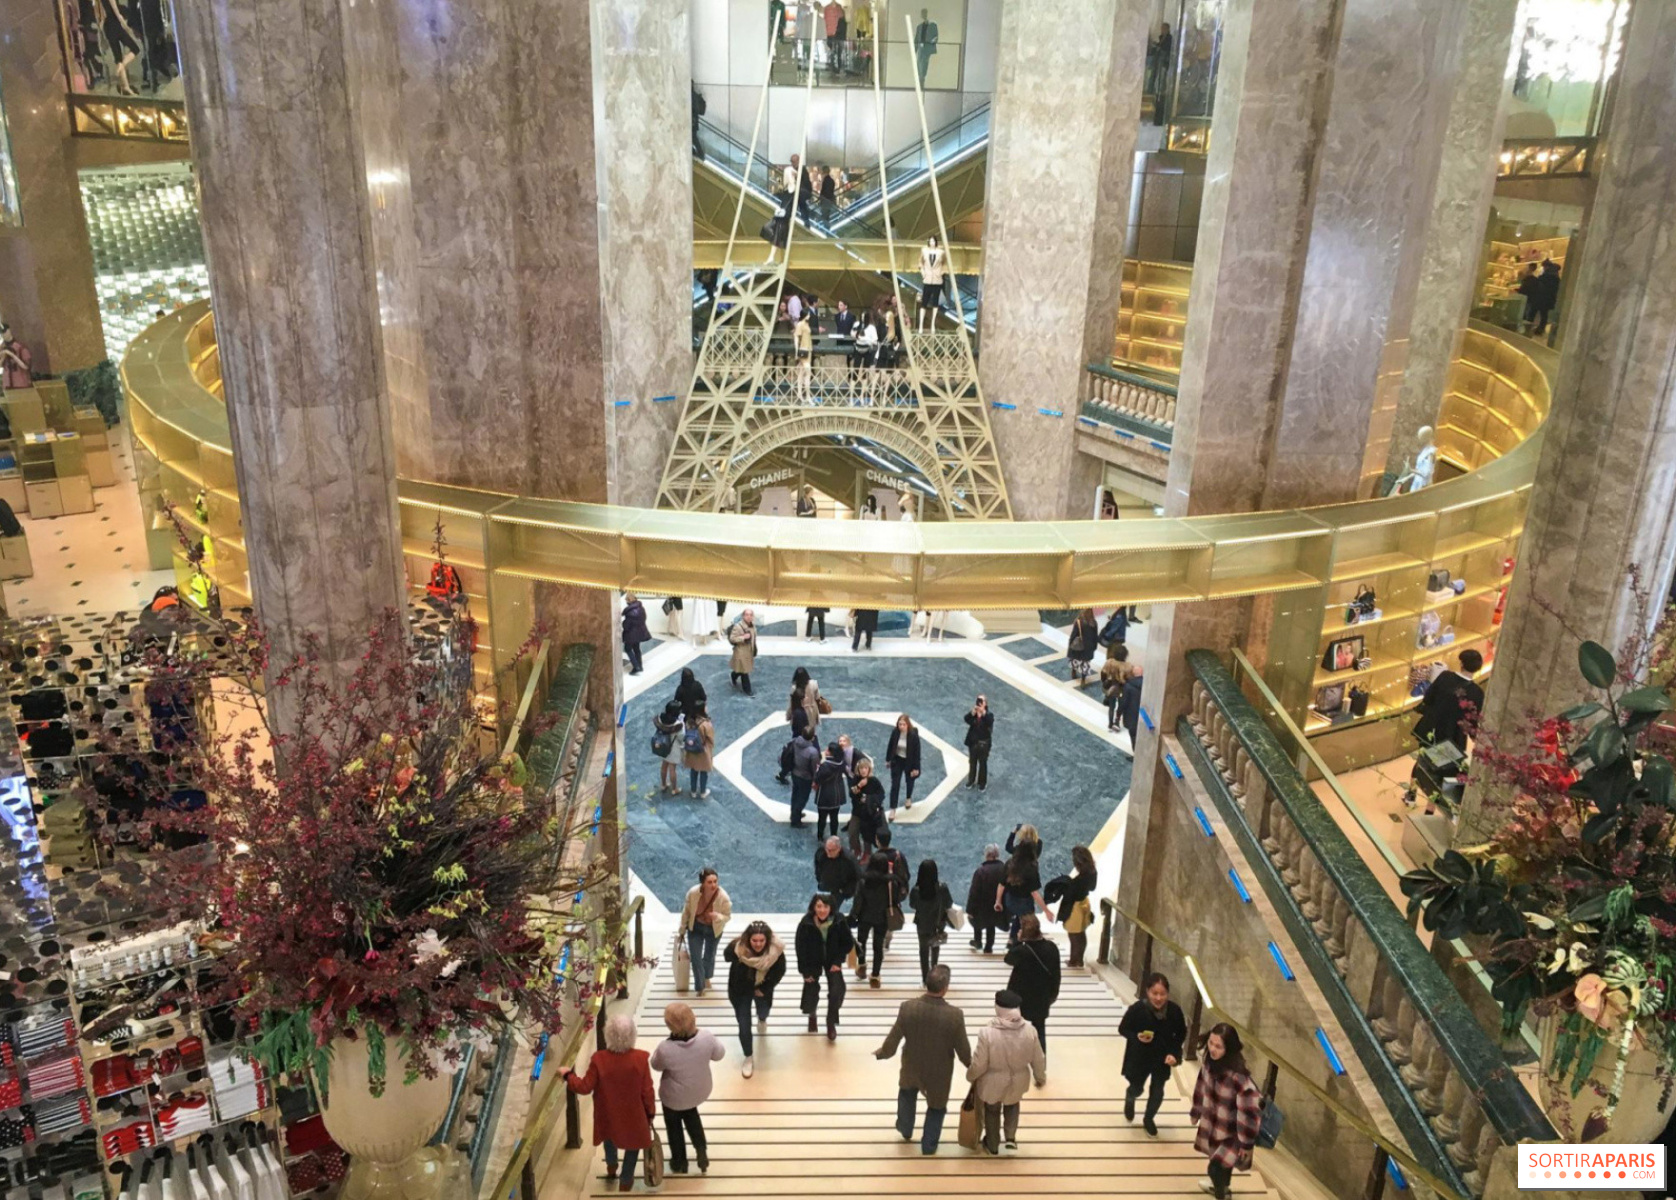 New Galeries Lafayette space to bring 'luxury lifestyle' back to